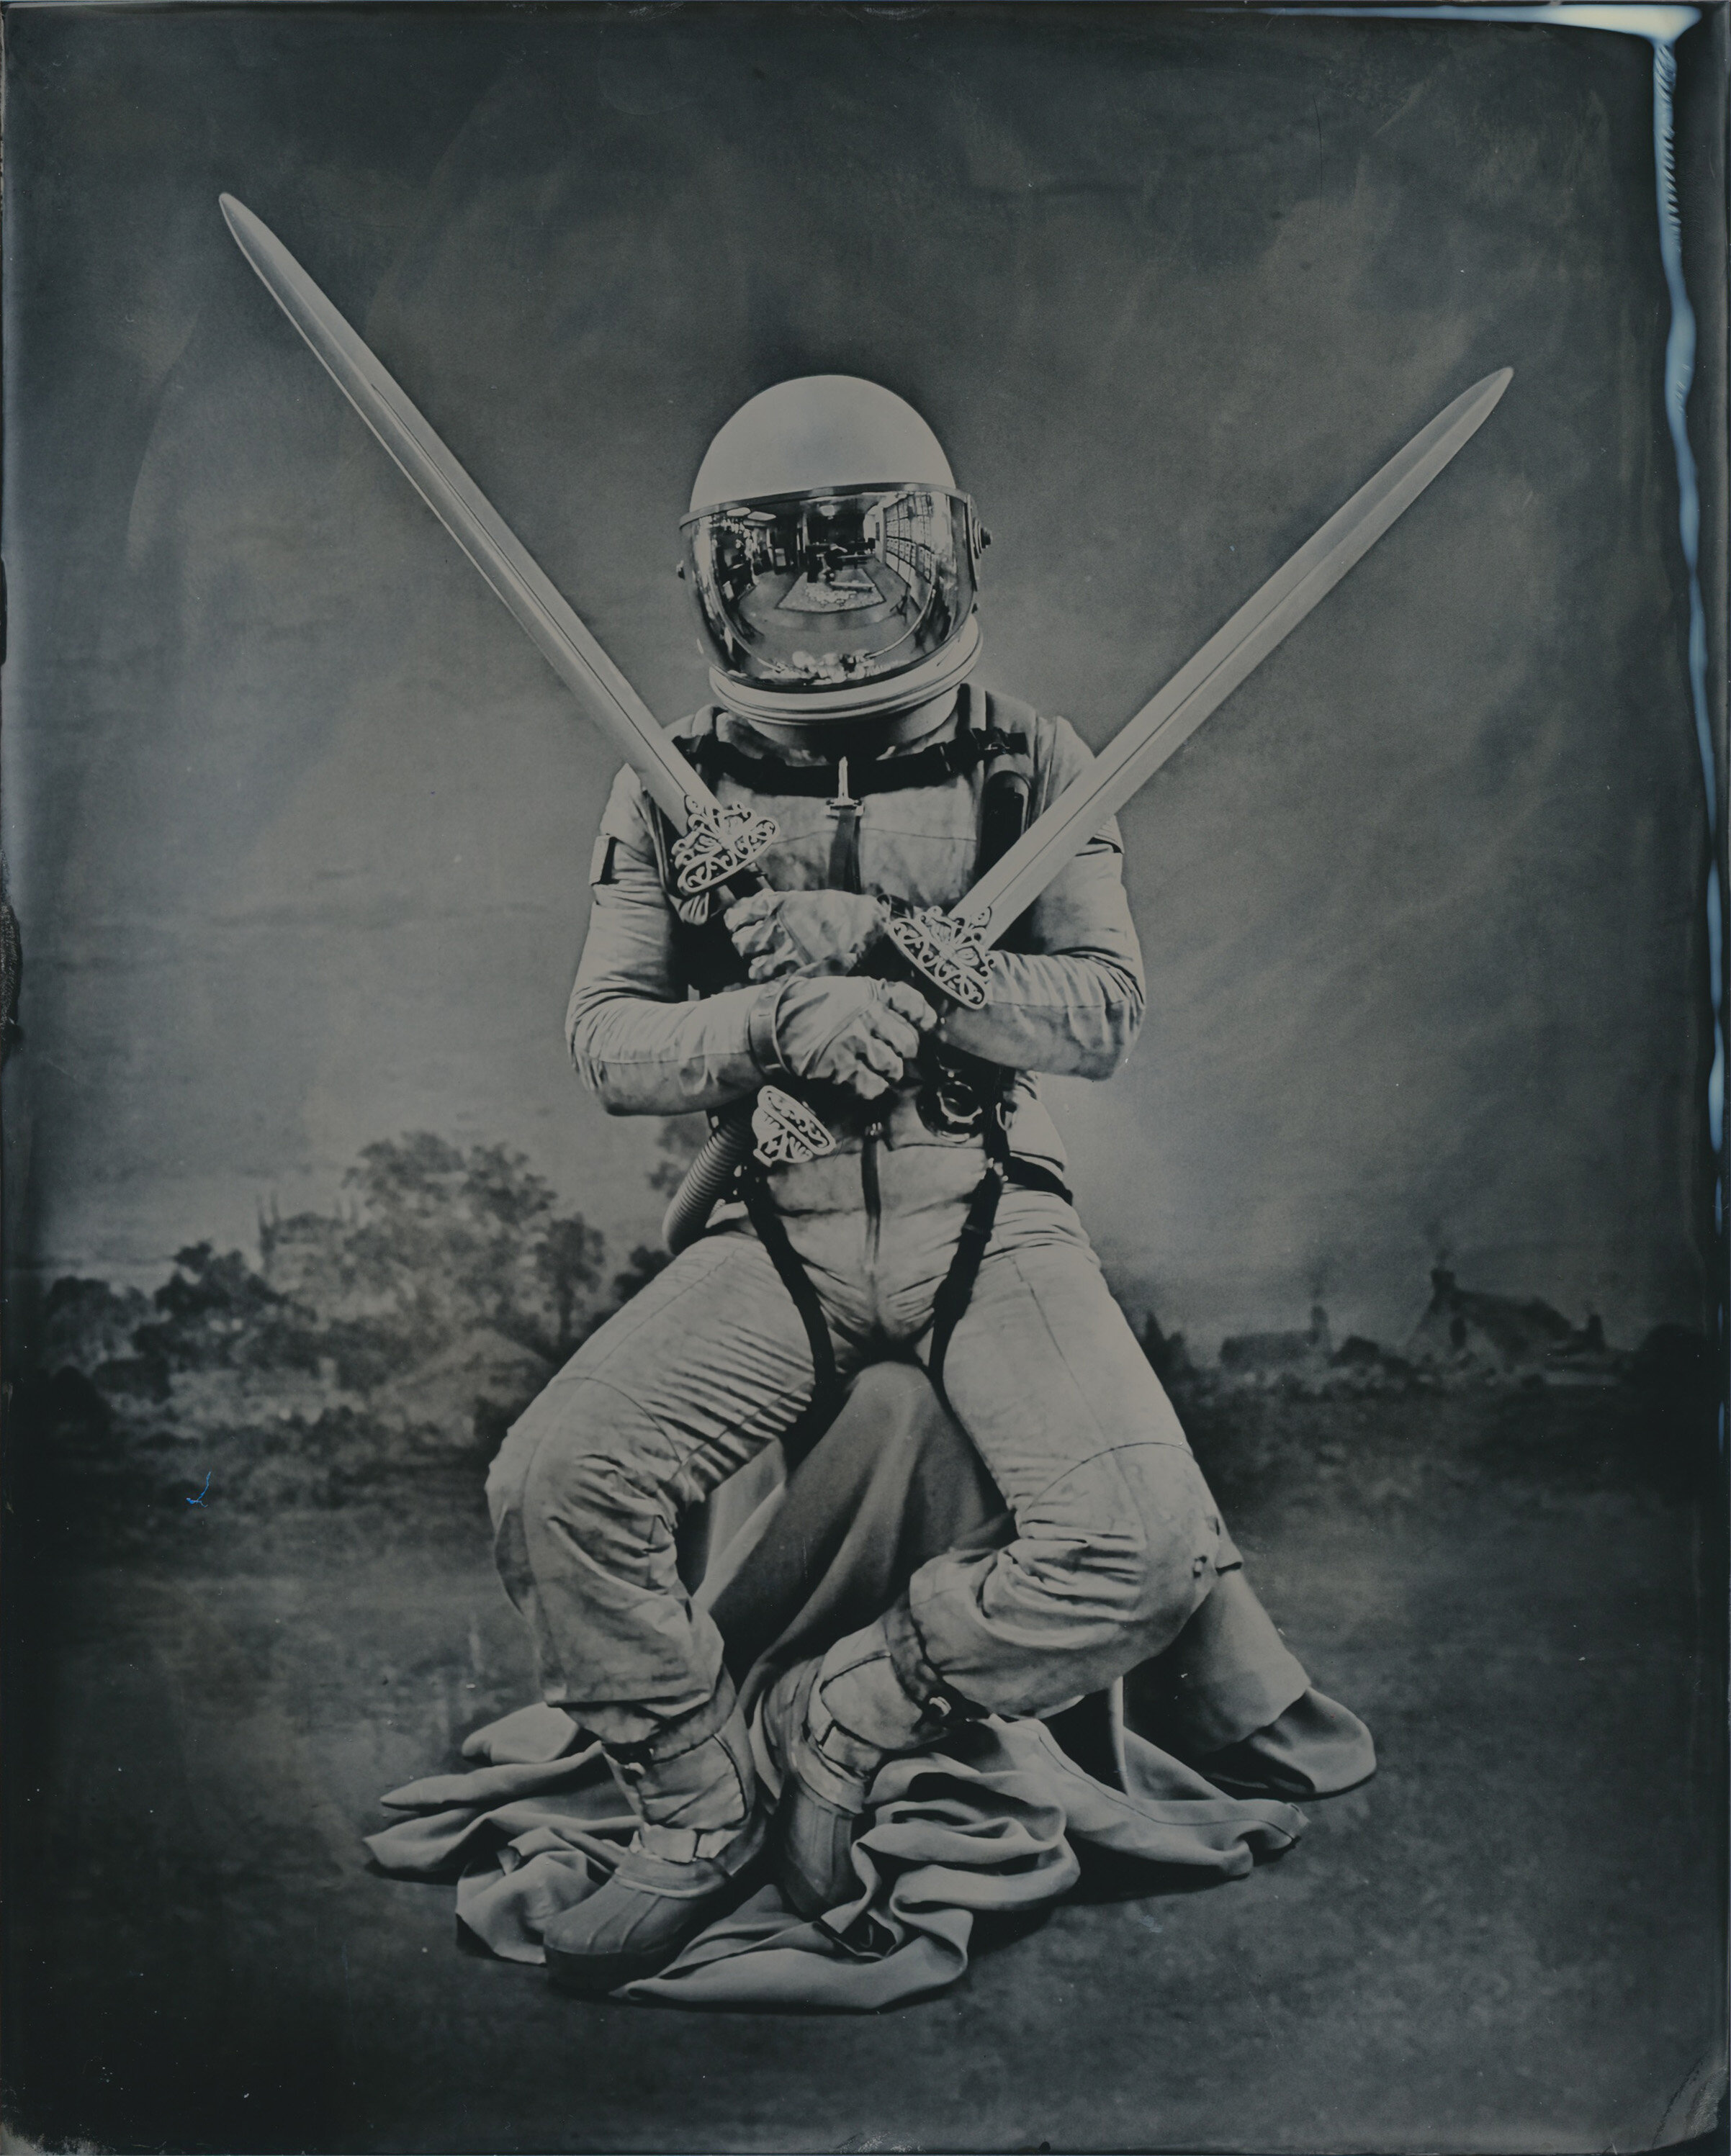   “Two of Swords”   2021  Wet Plate Collodion  8x10 